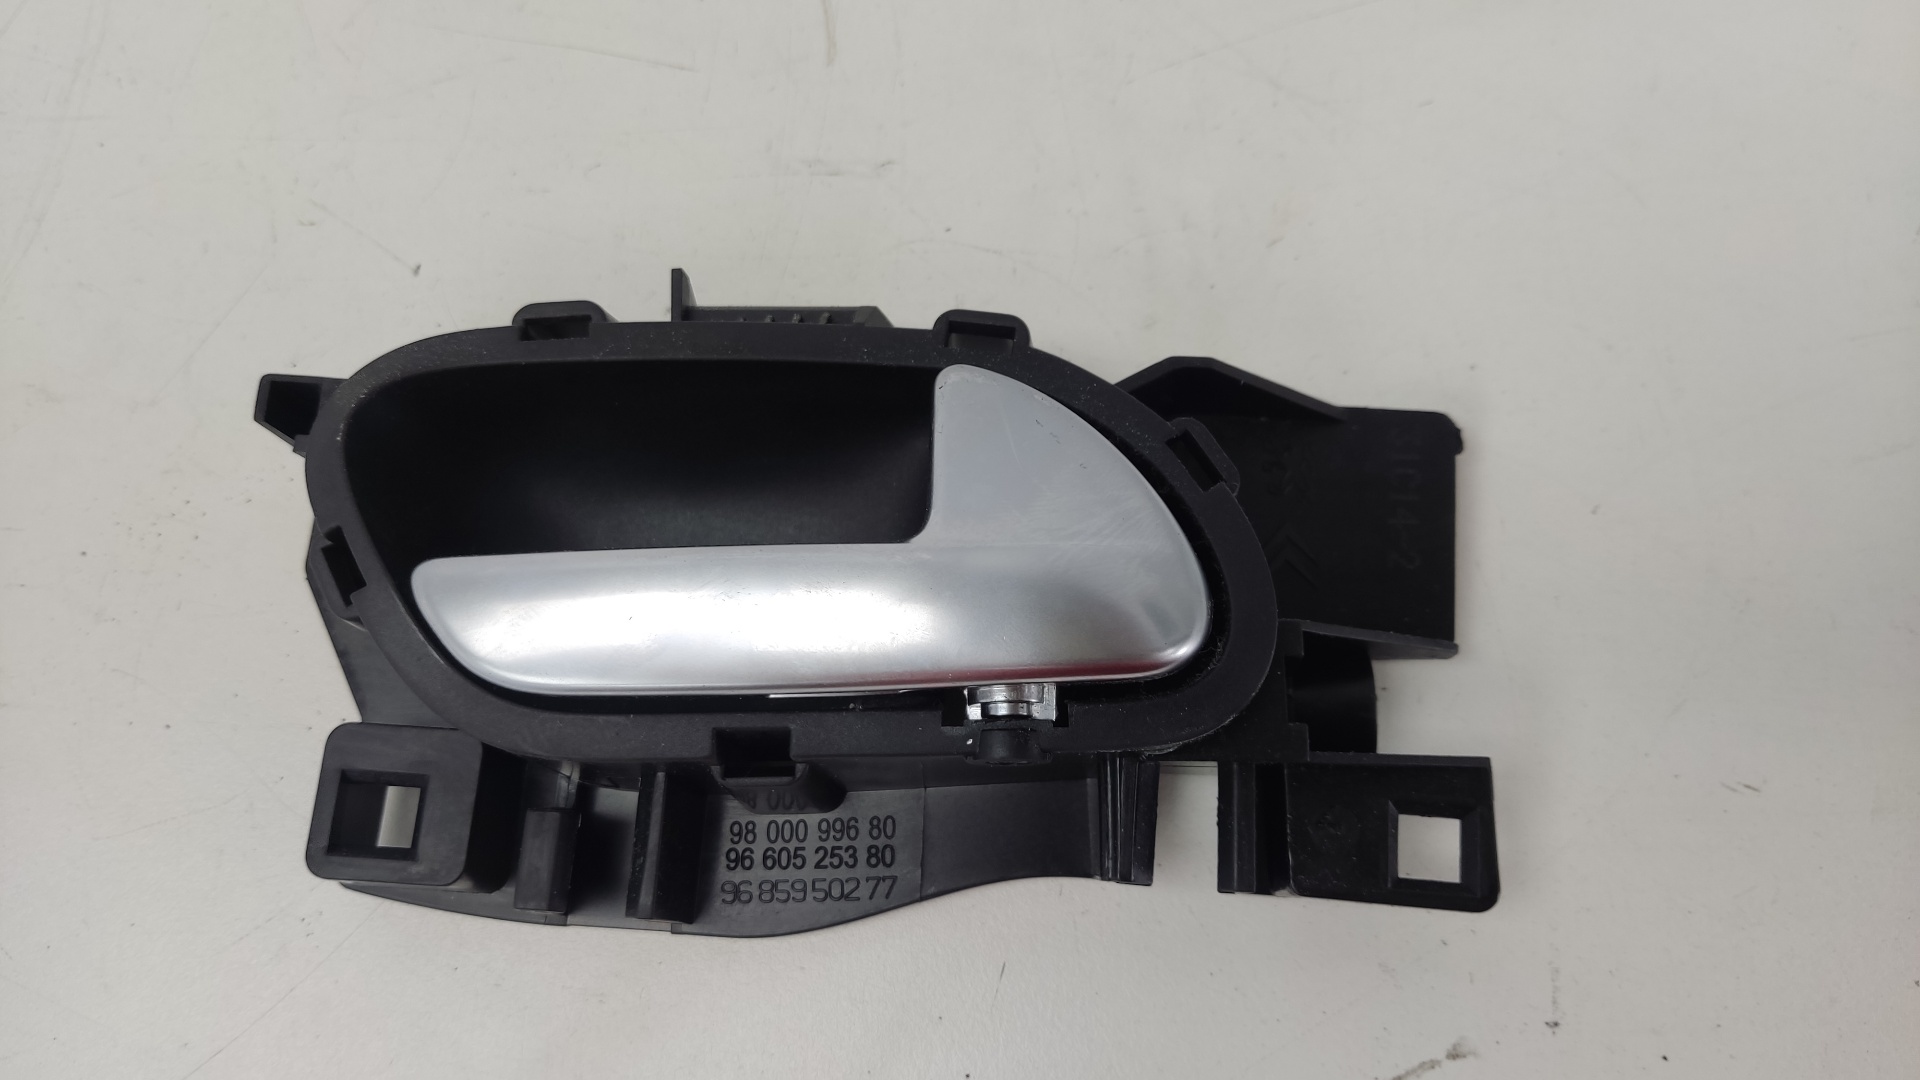 CITROËN C4 Picasso II (2013-present) Right Rear Internal Opening Handle 9800099680, 9660525380, 9685950277 24582017